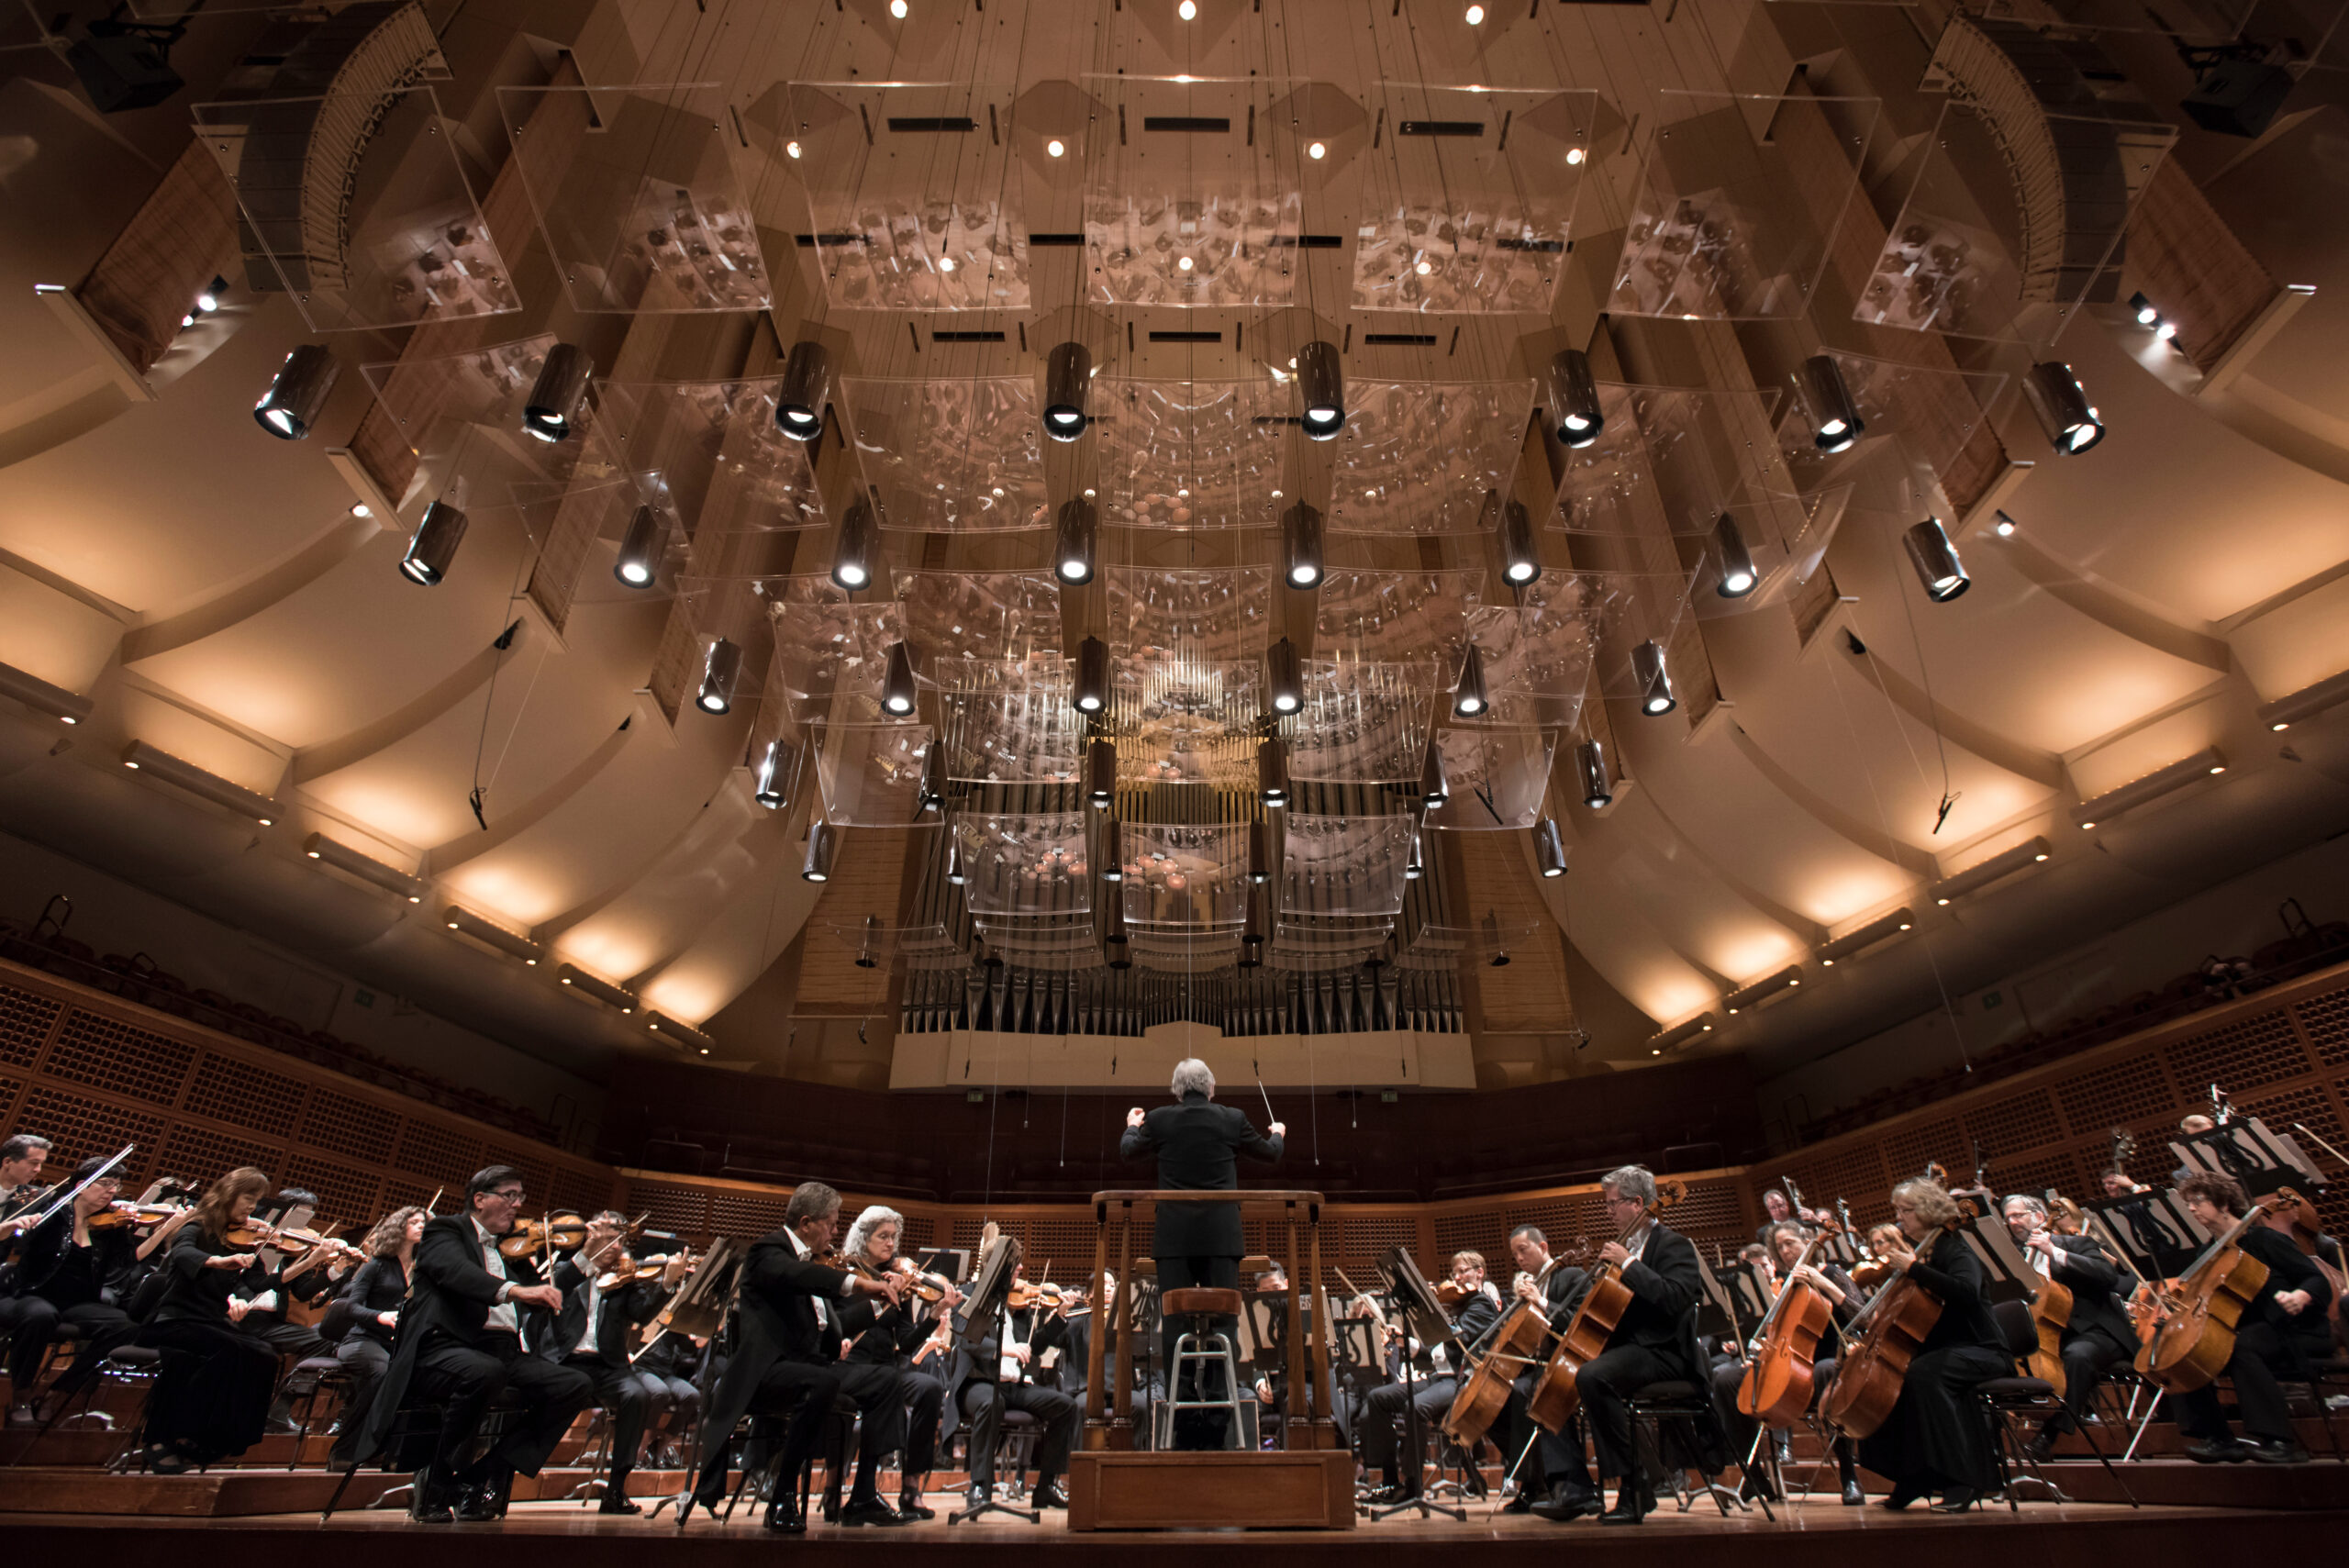 A symphony orchestra performs on stage in a grand concert hall with a conductor in front. The ceiling features numerous lights and acoustical panels.